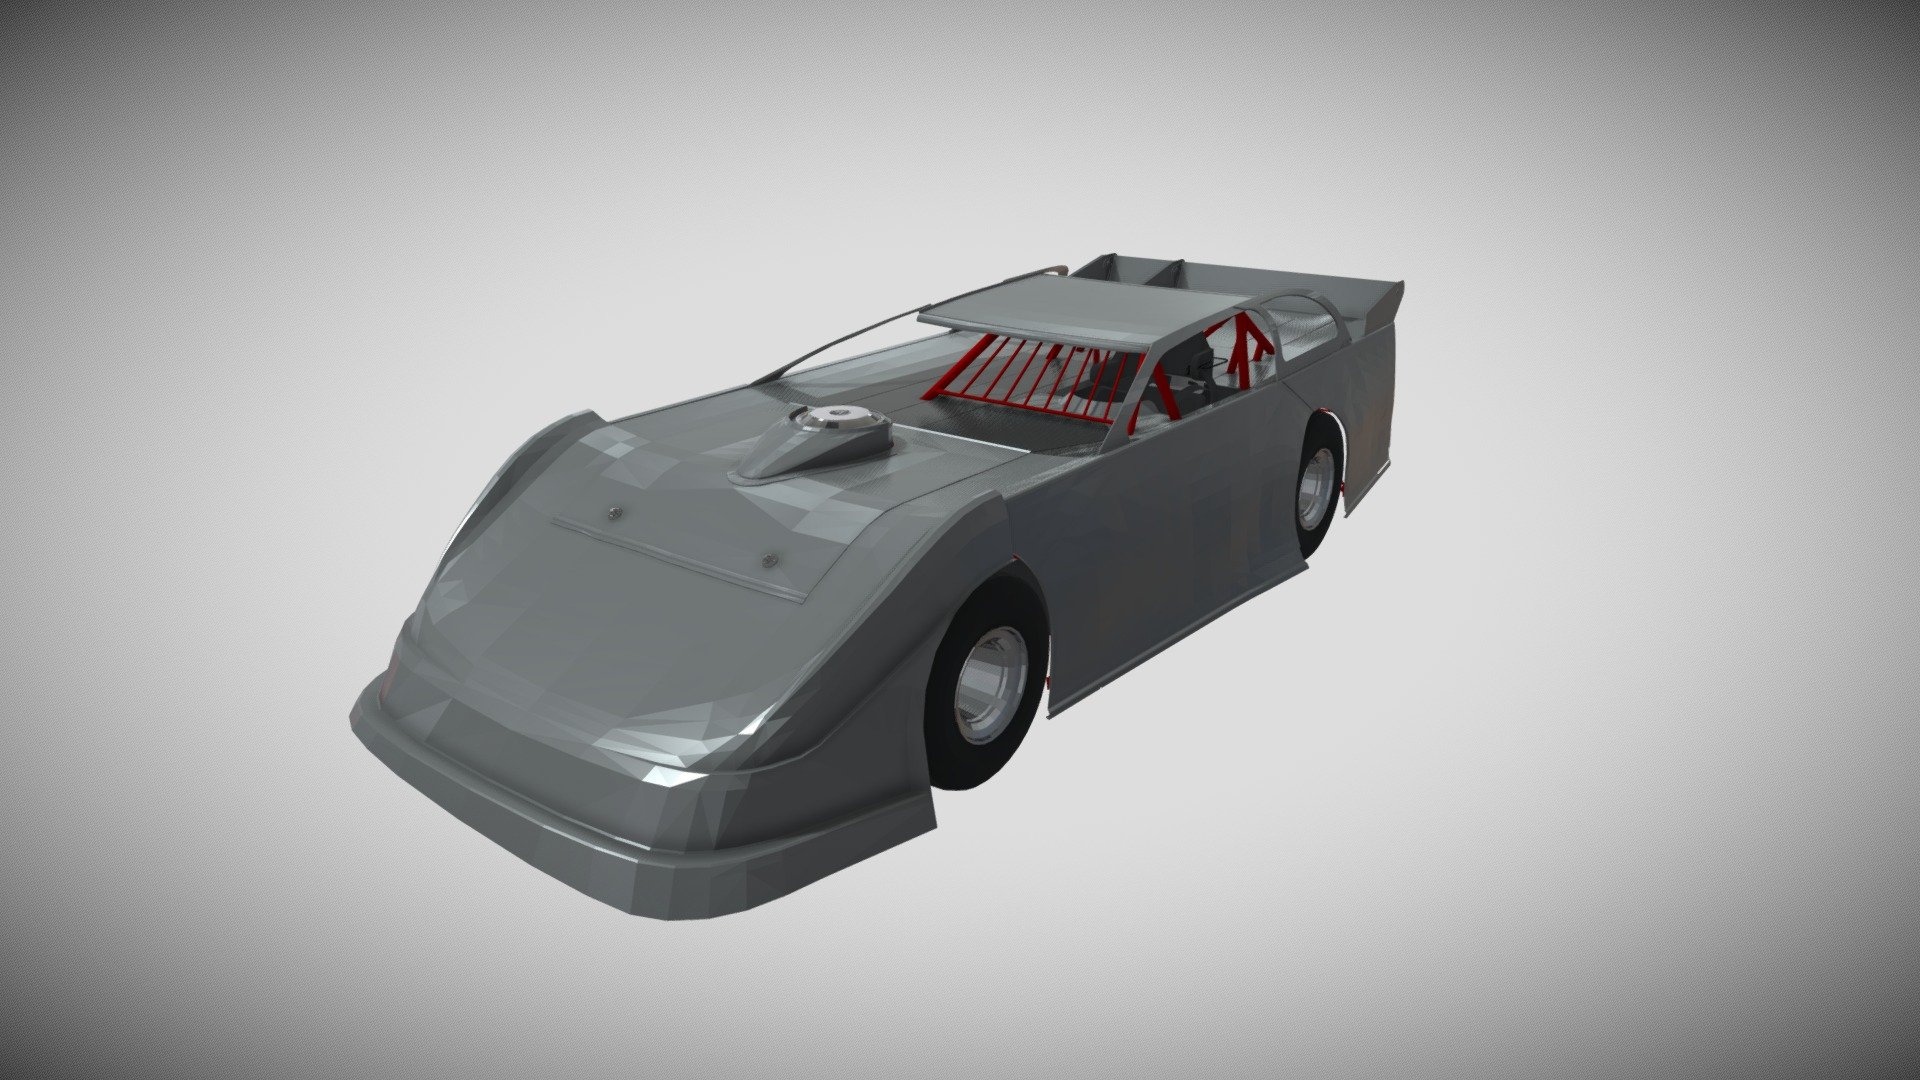 Dirt Late Model race car, Low Poly Model made in Maya 2023

A tribute to my first low poly model, this time done in a more detailed way&hellip; - Dirt Late Model v2 - High Poly - 3D model by Total Craft (@total_craft) 3d model